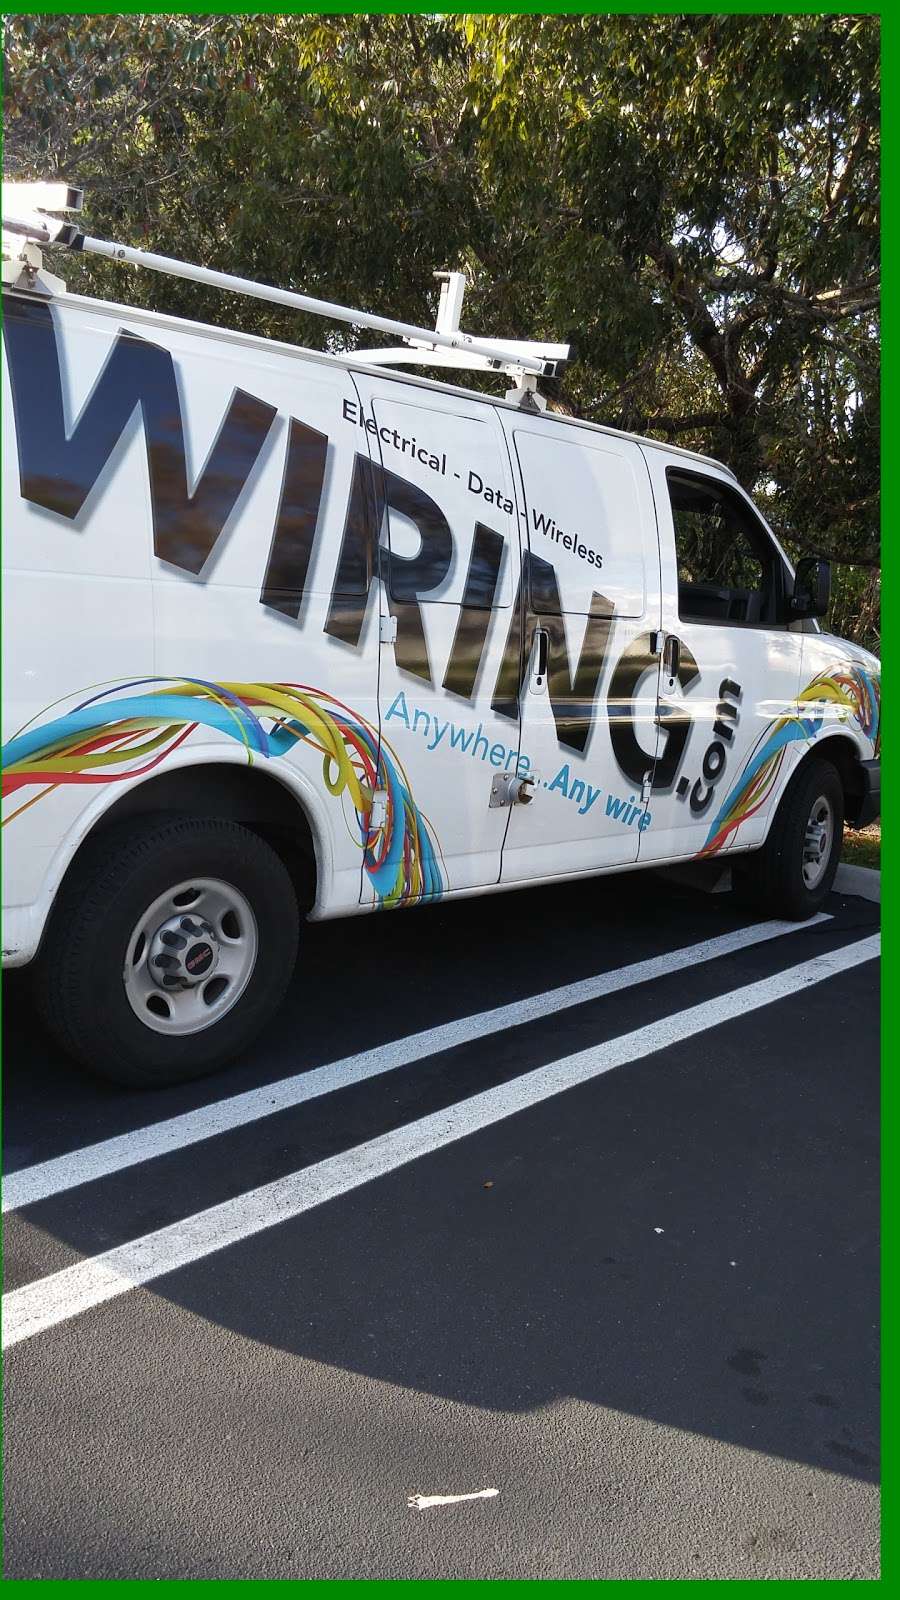 Wiring.Com | 4450 NW 126th Ave, Coral Springs, FL 33065, USA | Phone: (954) 578-9990